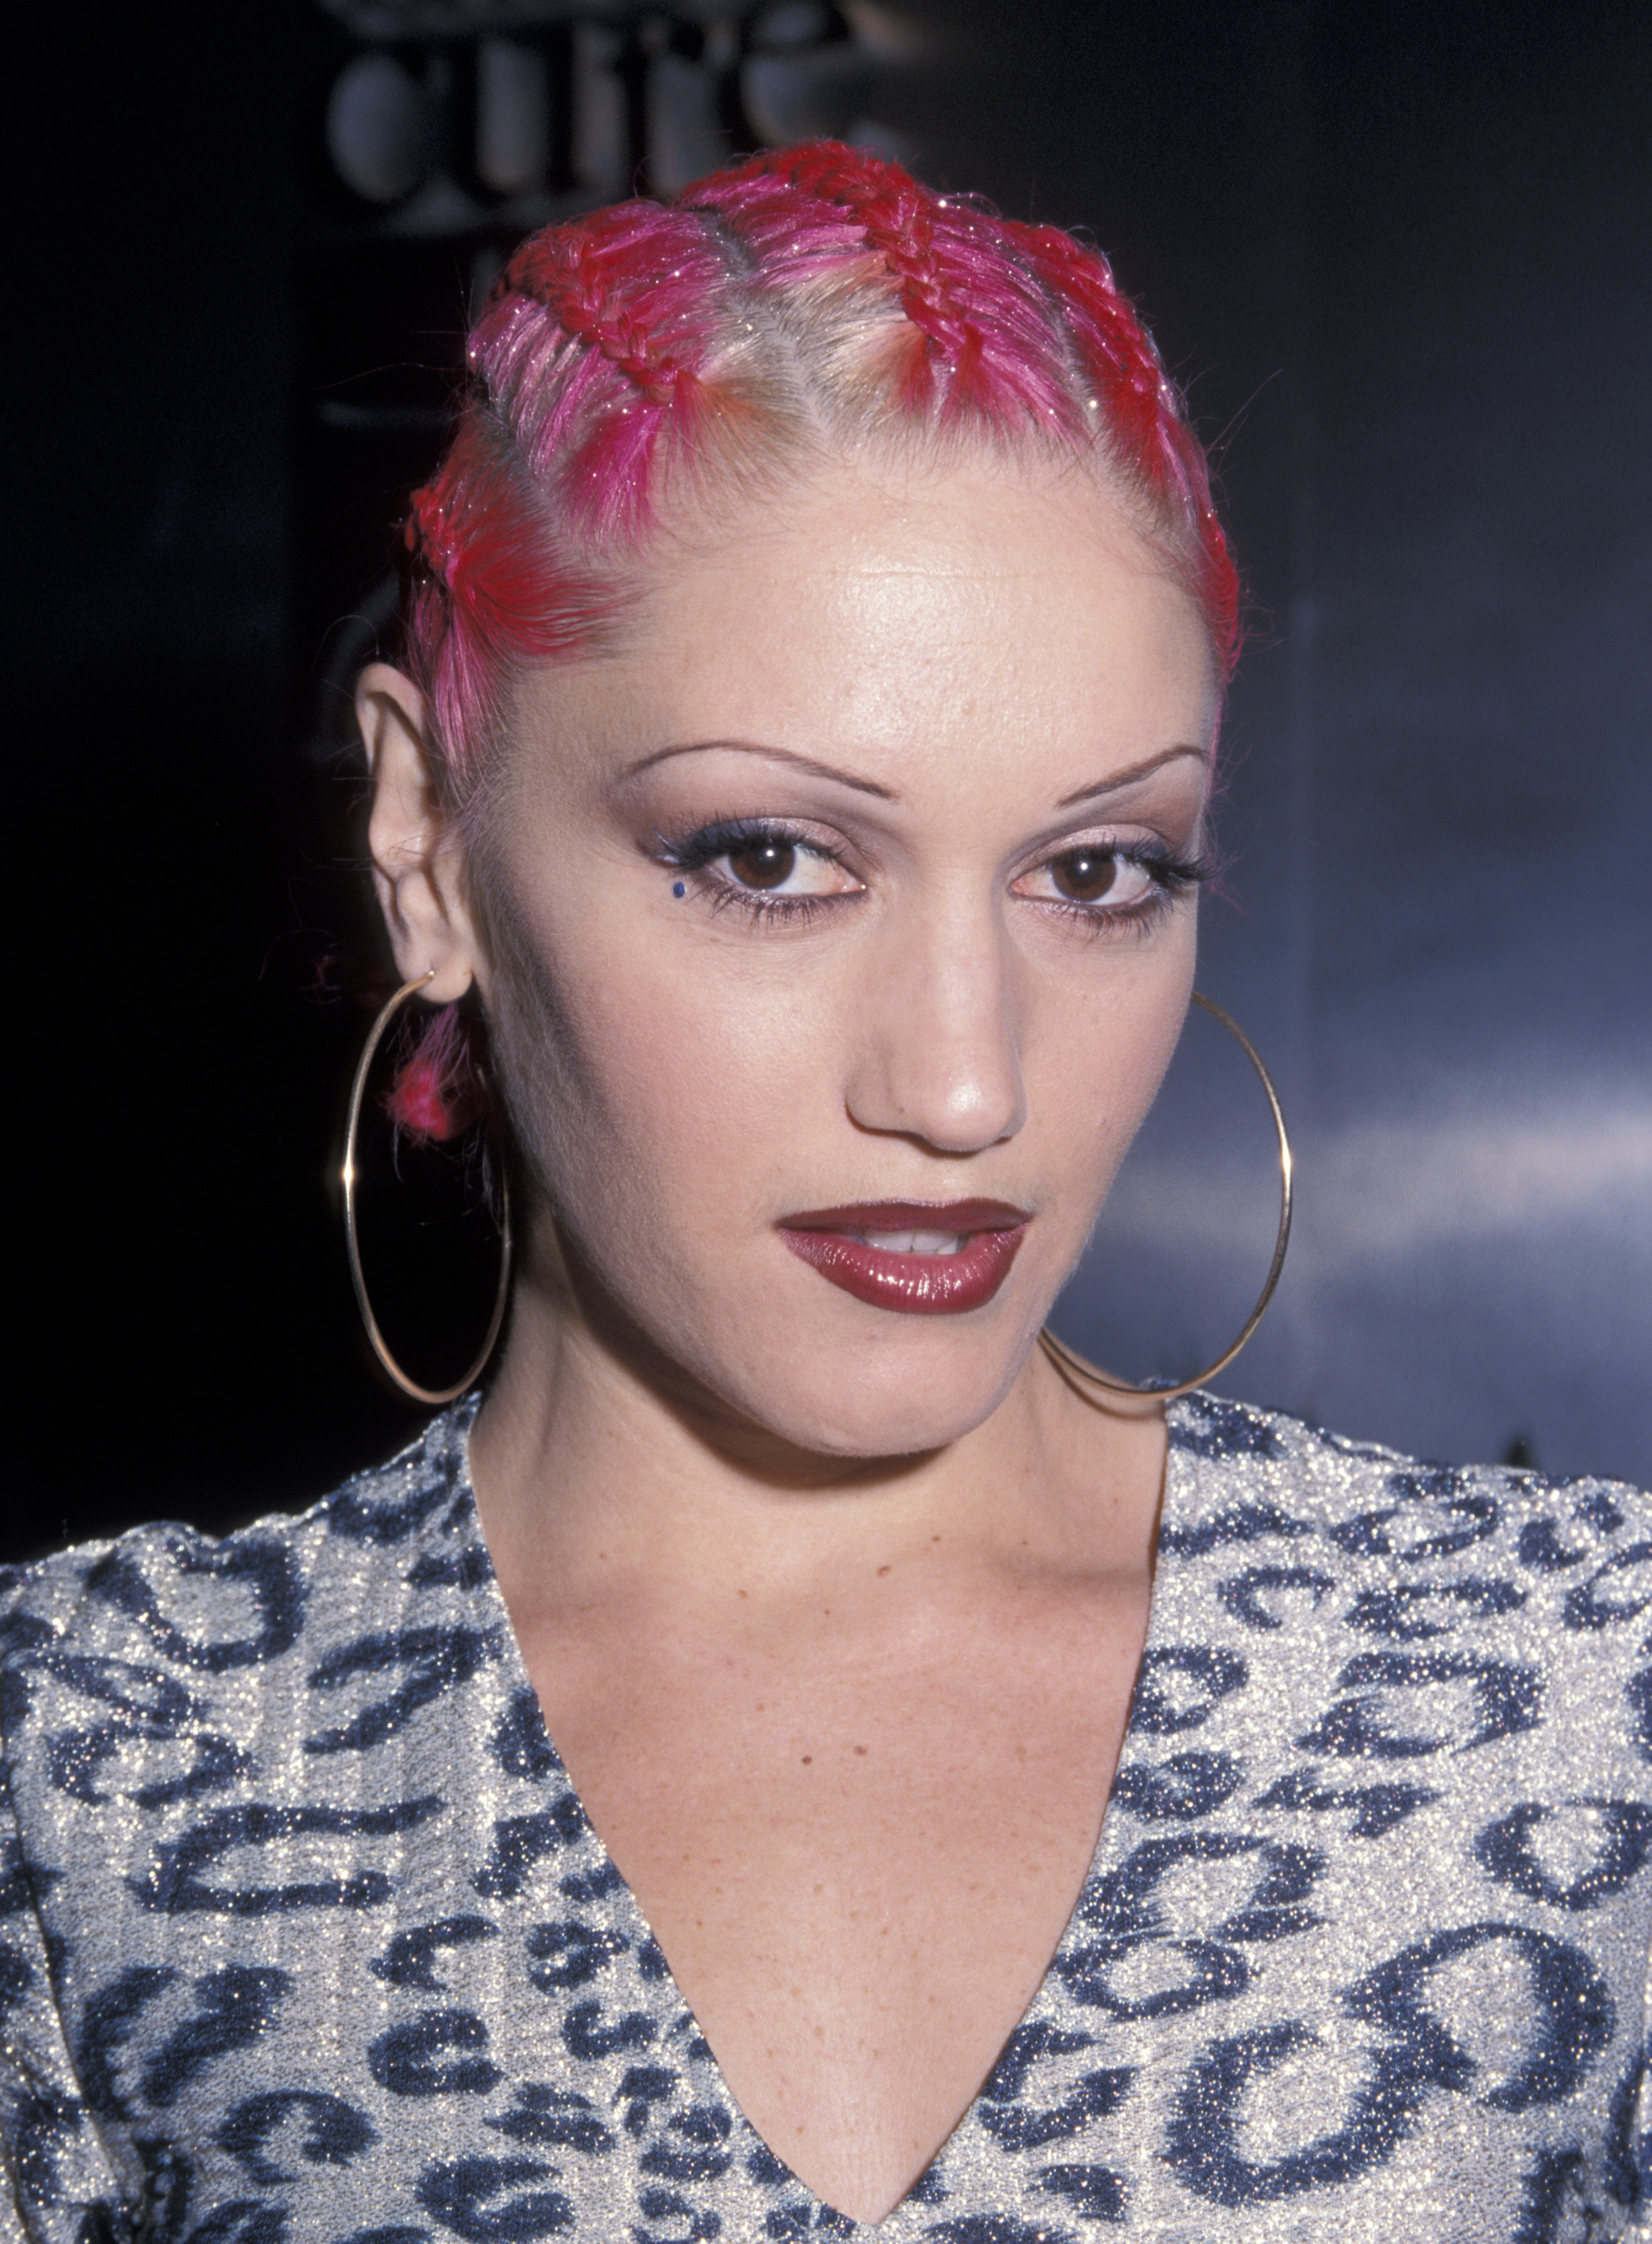 Gwen Stefani on February 10, 2000 | Source: Getty Images